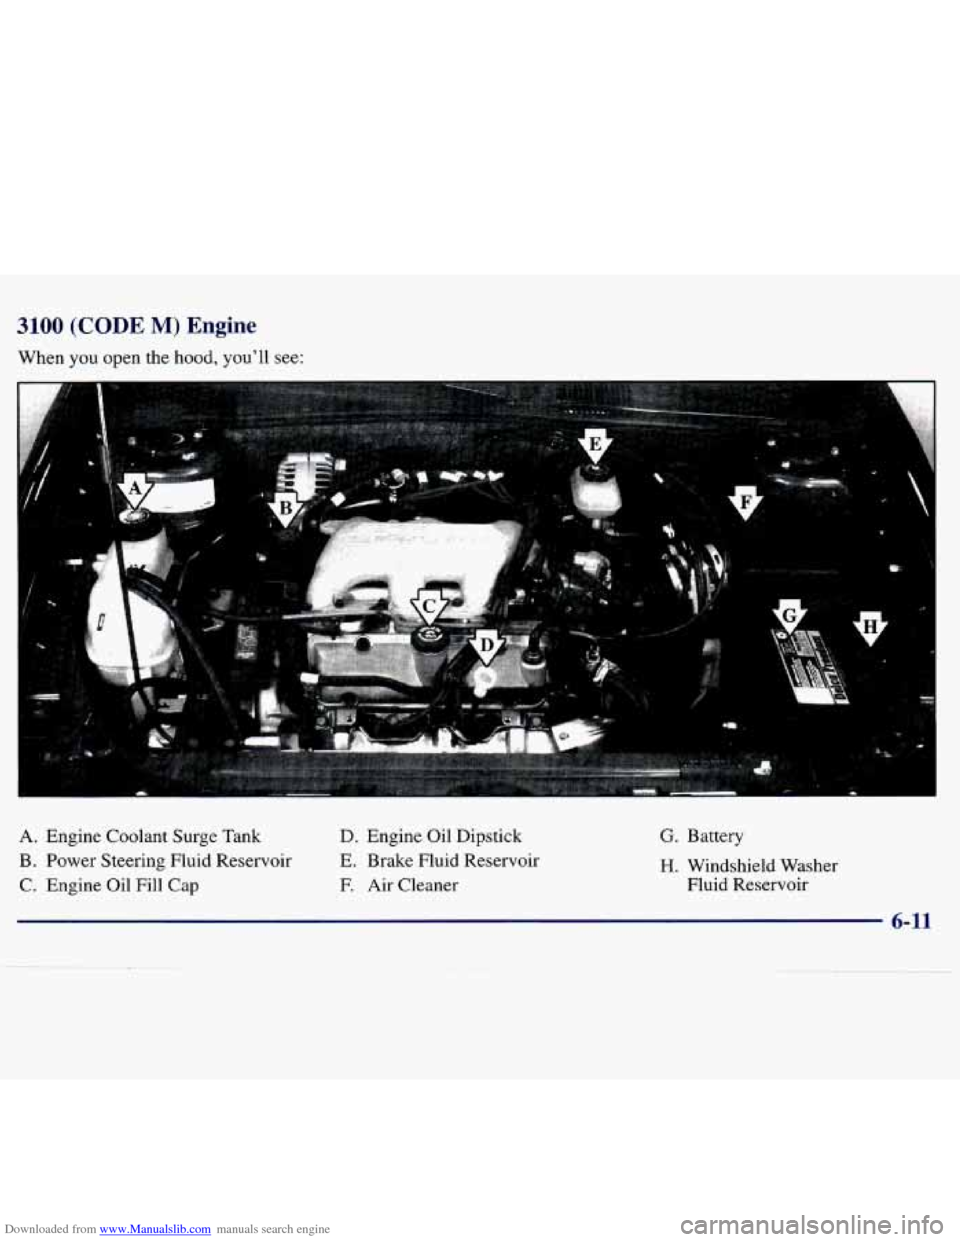 CHEVROLET MALIBU 1997 5.G Owners Manual Downloaded from www.Manualslib.com manuals search engine I100 (CODE M) Engine 
Yhen you open the hood, you’ll see: 
A. Engine  Coolant  Surge  Tank 
B.  Power  Steering  Fluid  Reservoir 
C. Engine 